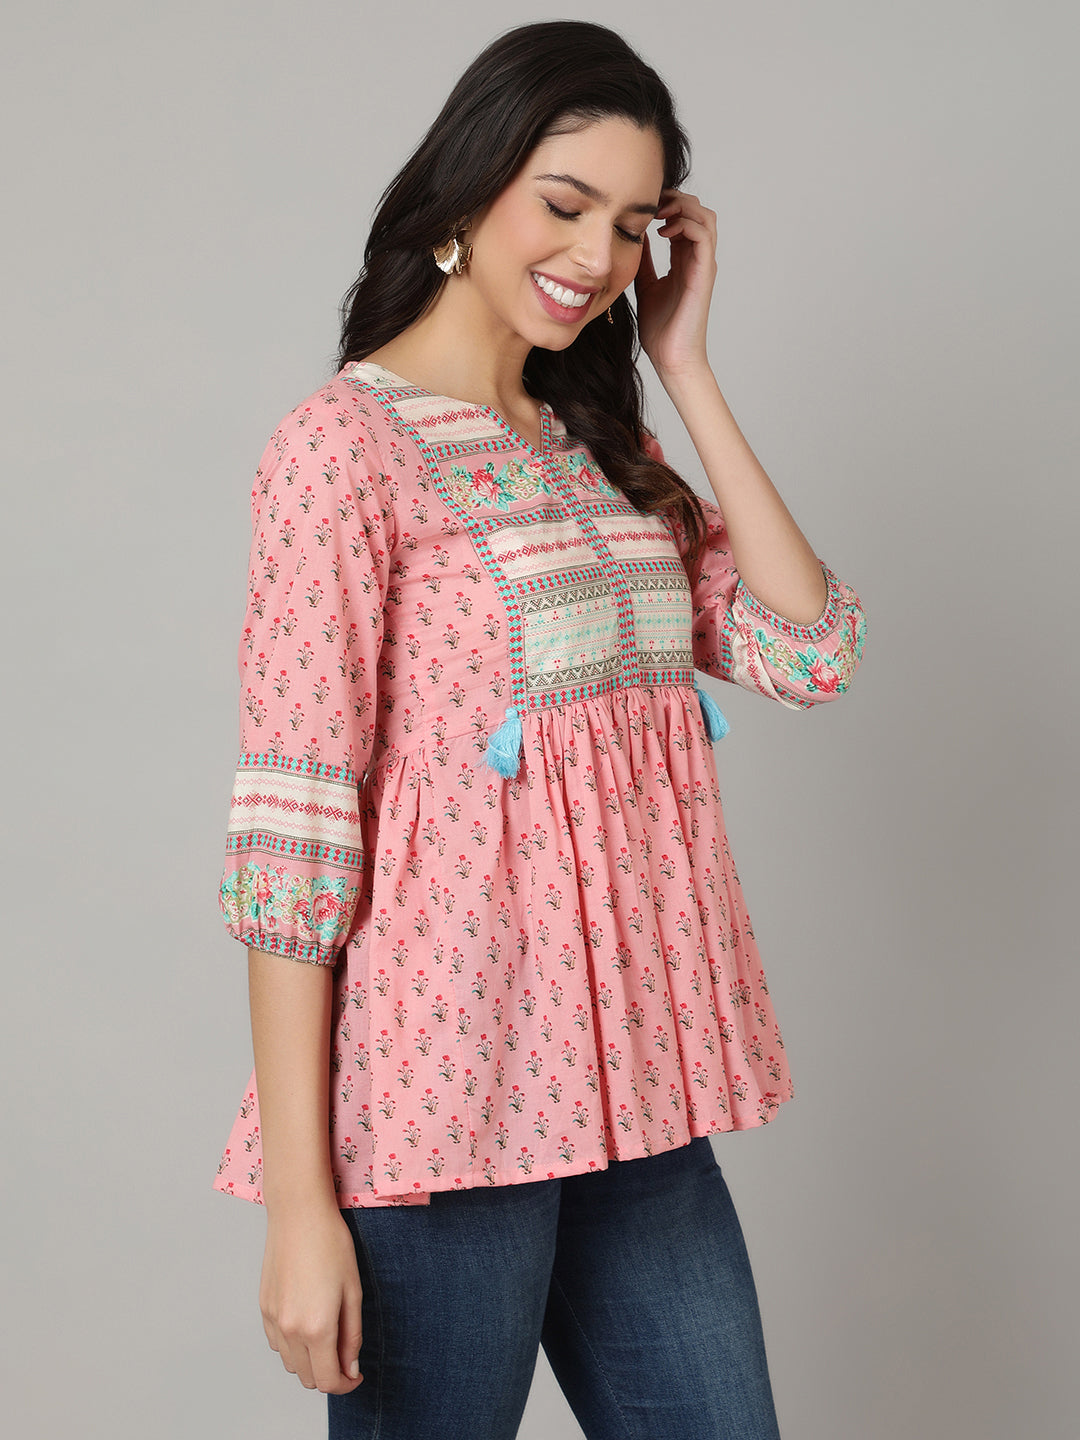 Floral Print Flared Tunic   Top